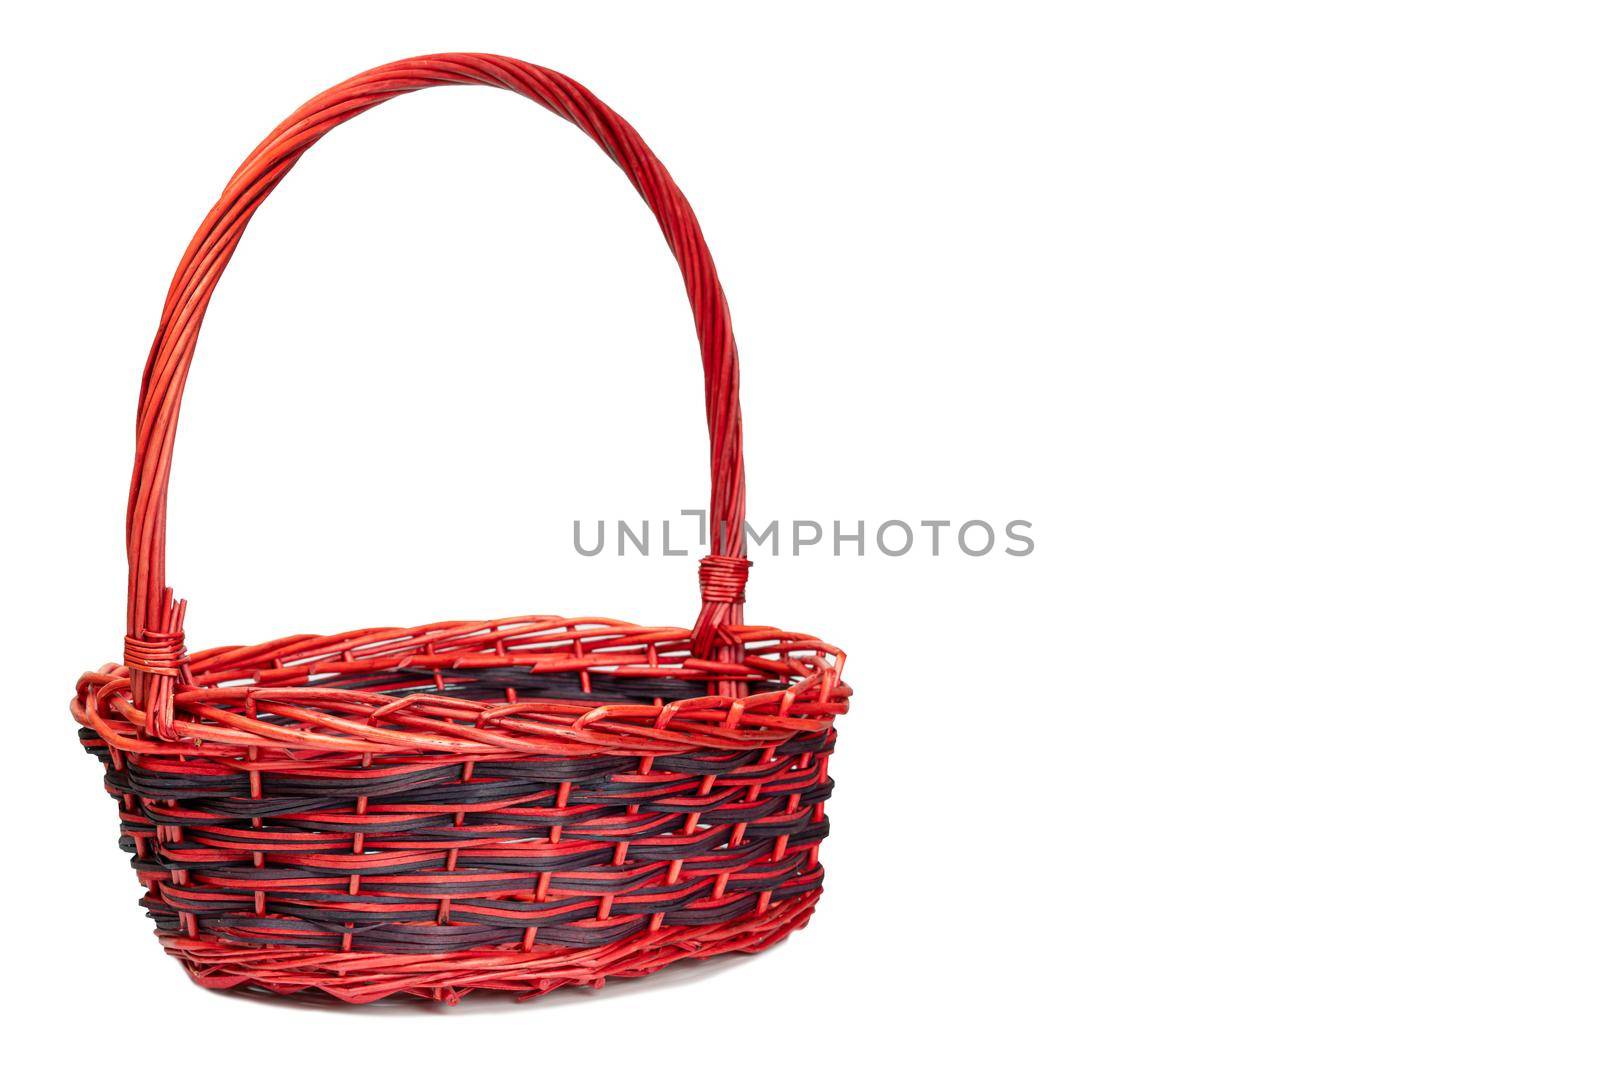 Red weave basket with clipping path on isolated